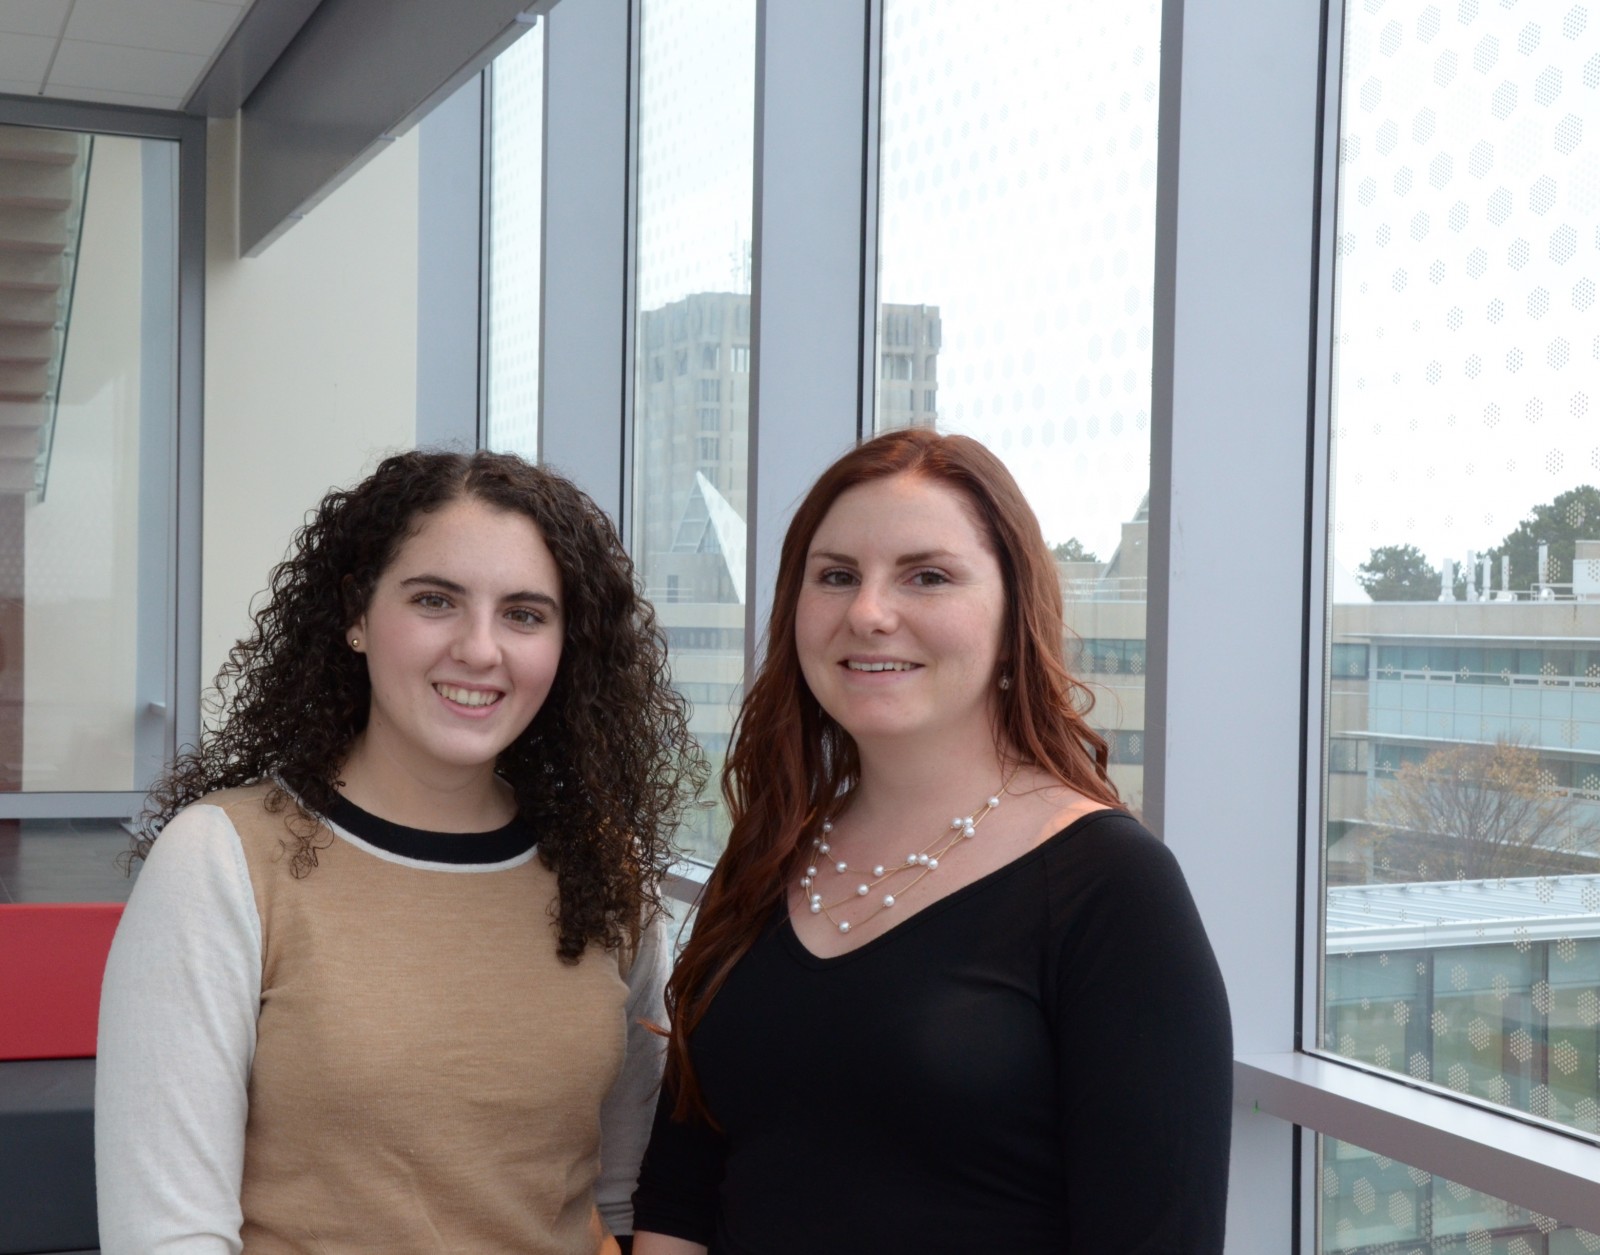 Brock University Health Sciences students Bianca Fucile and Sierra Barrett have been recognized for their work in the Interprofessional Education for Quality Improvement Program (I-EQUIP).